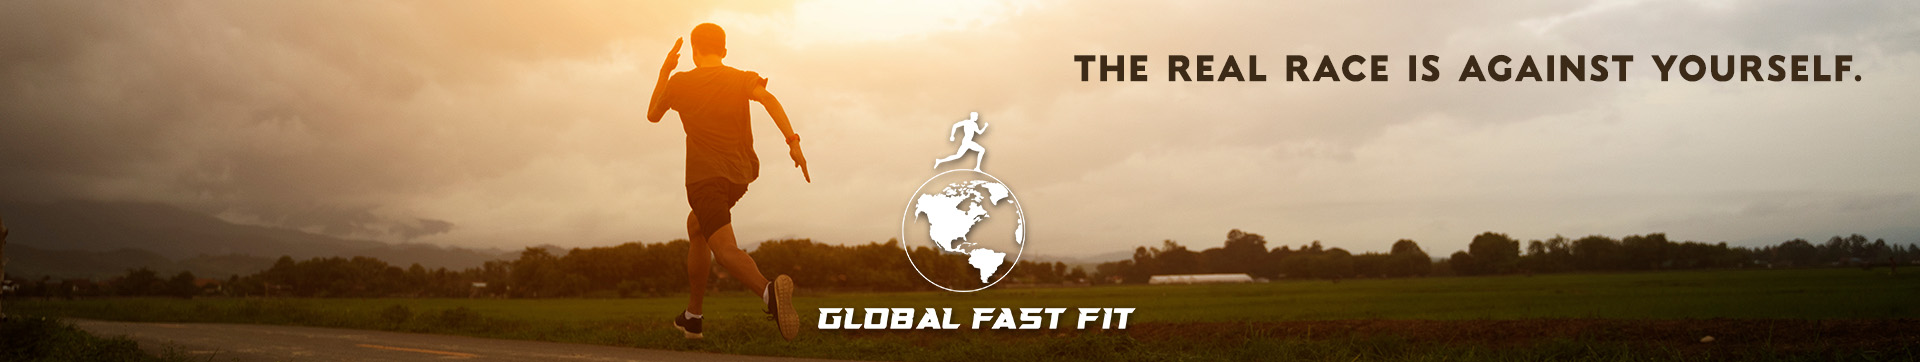 Global Fast Fit